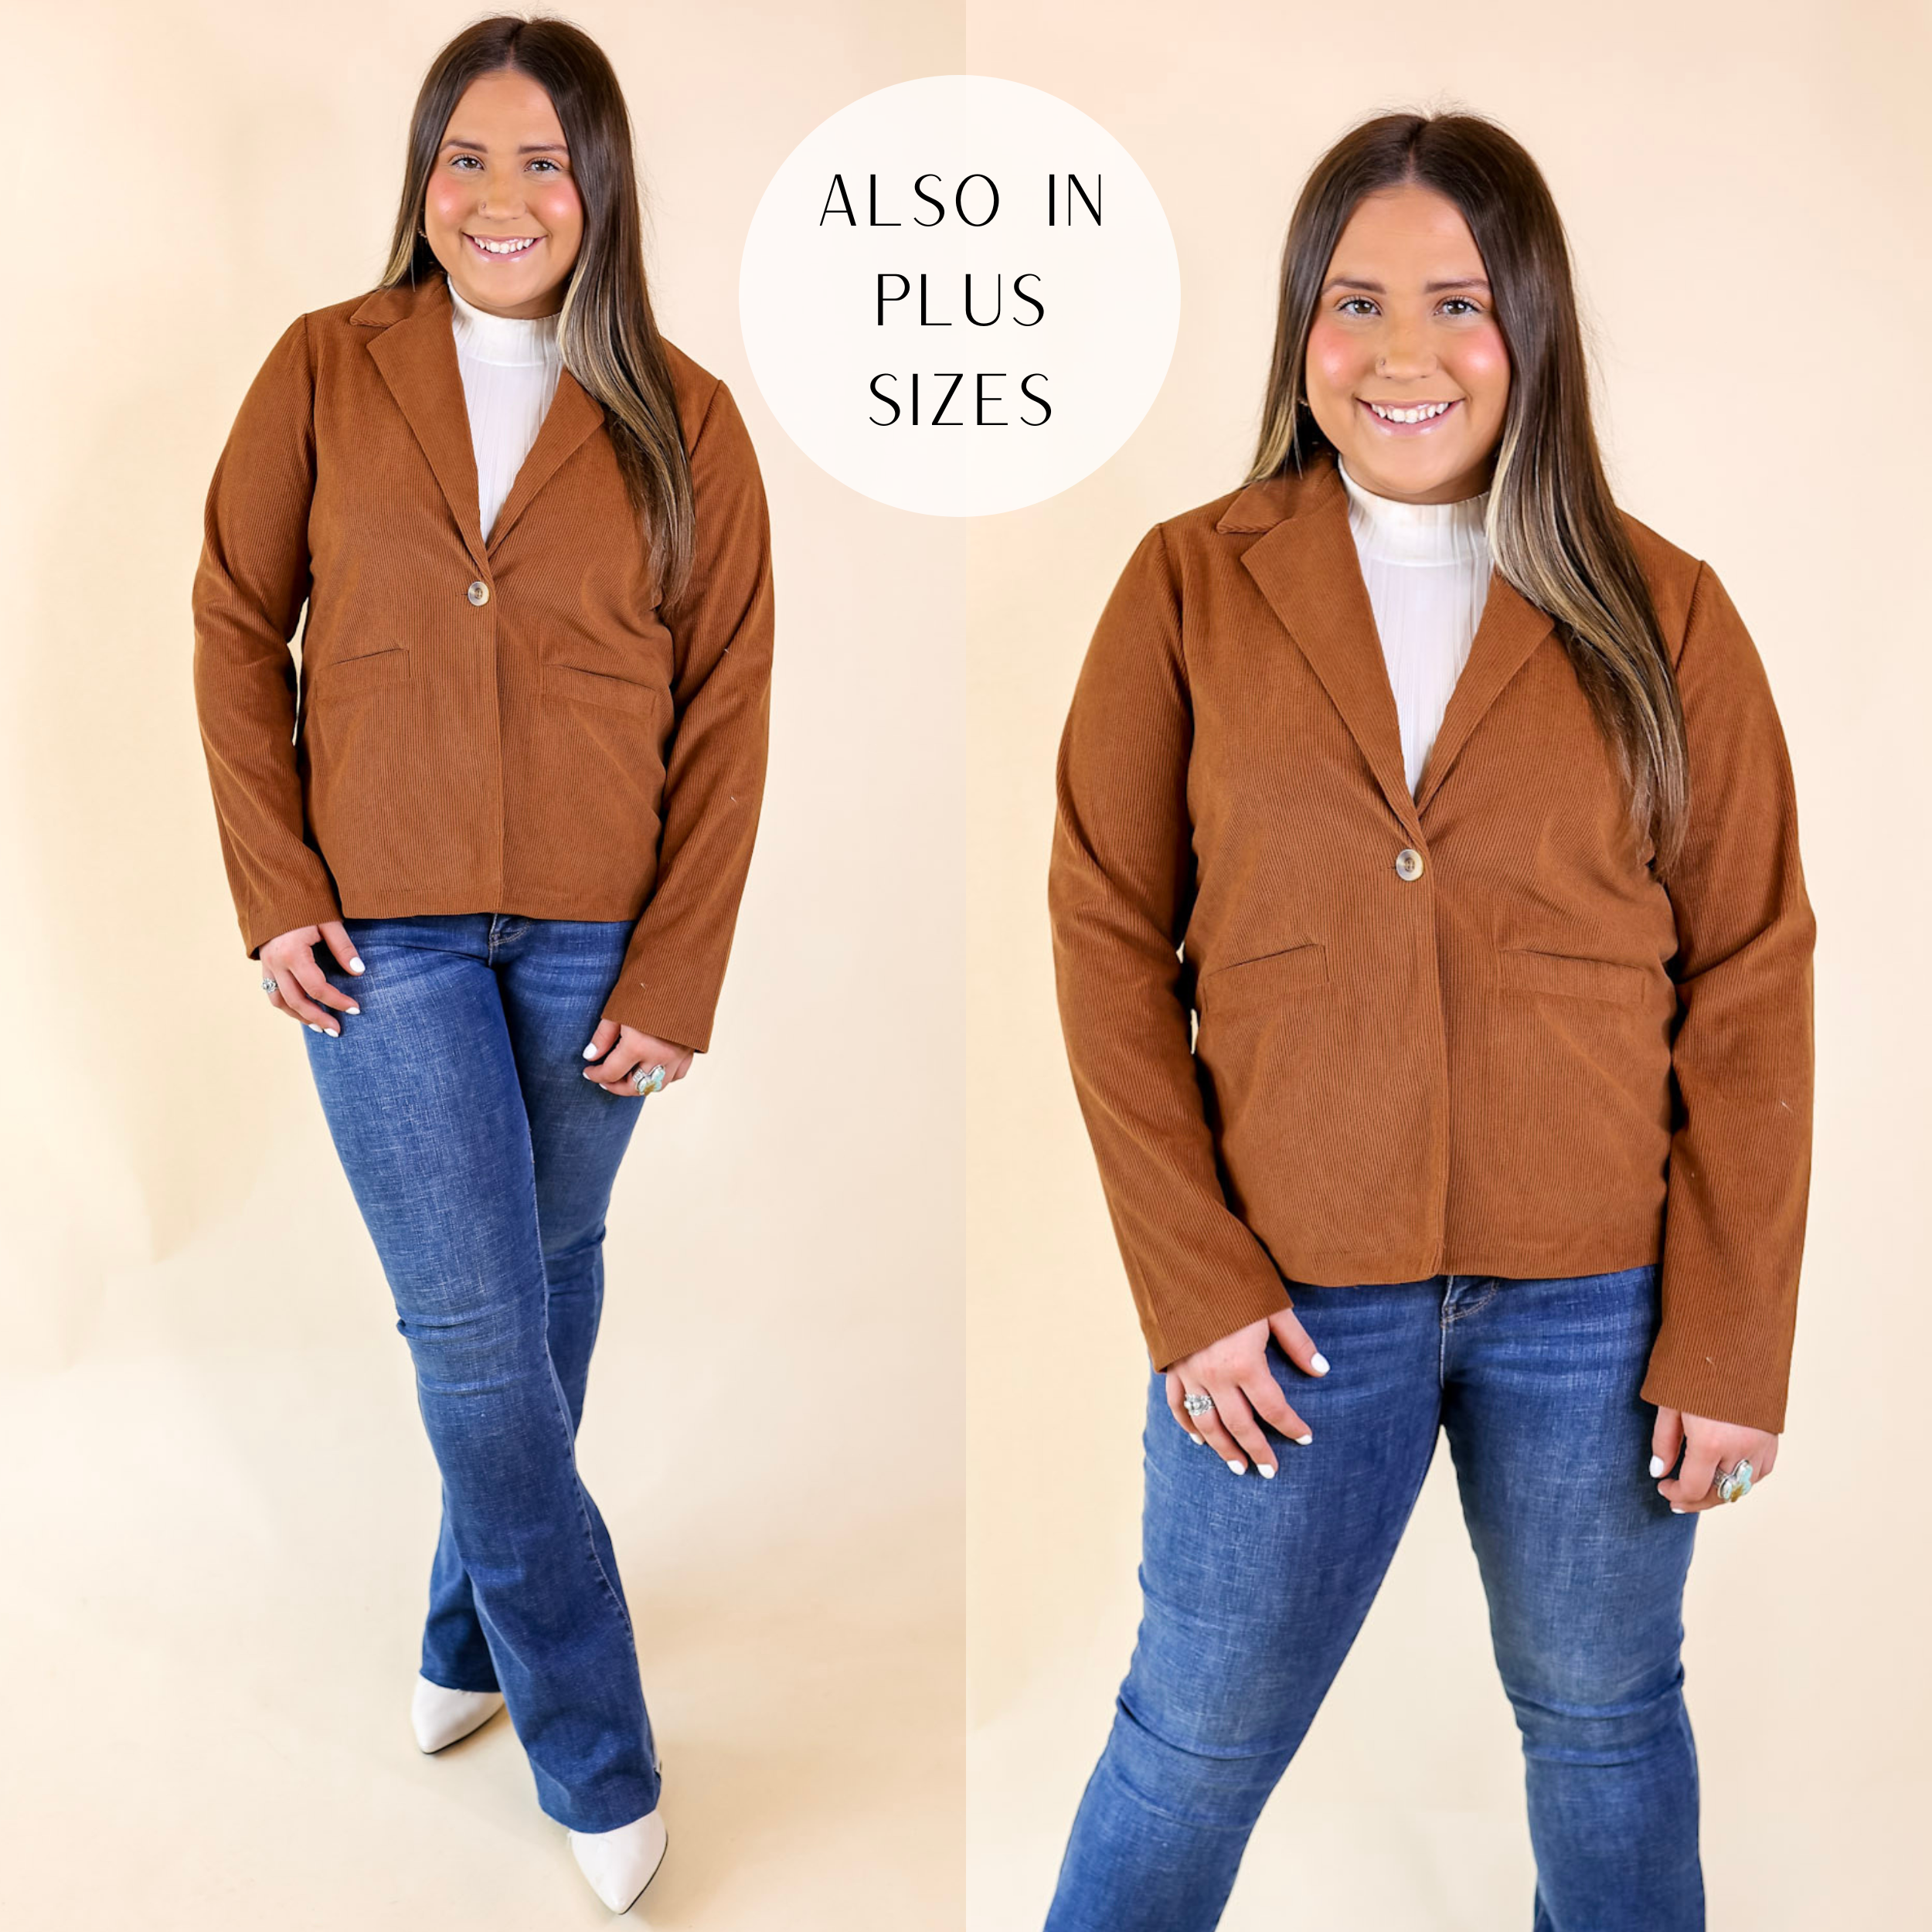 New York Groove Corduroy Blazer in Brown - Giddy Up Glamour Boutique